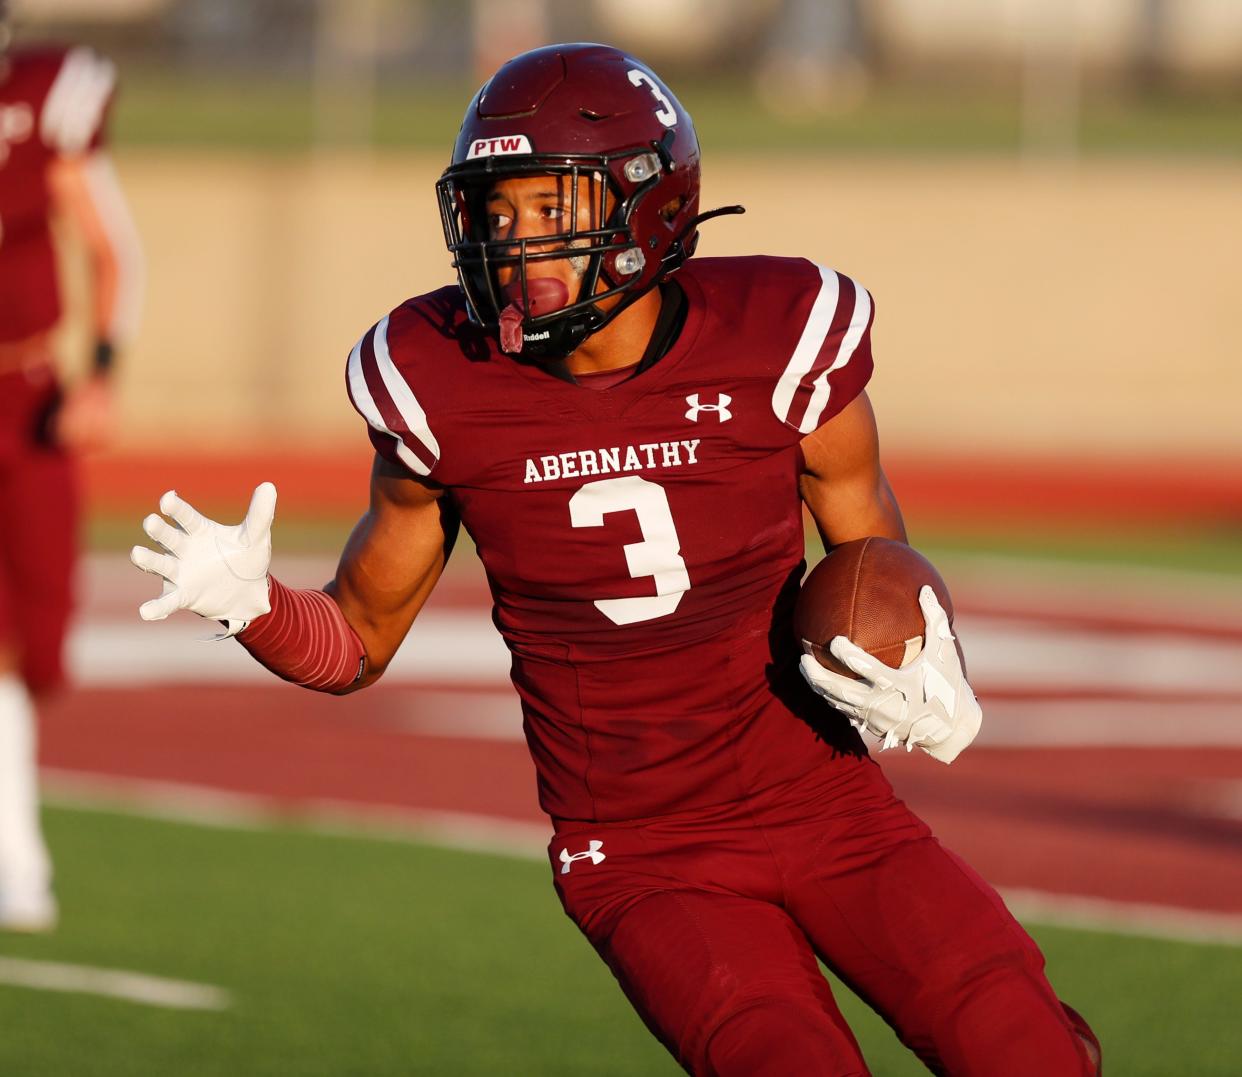 Abernathy wide receiver and safety Anthony White made a commitment Wednesday to Texas Tech. White, who missed this season with a knee injury, was credited with 88 tackles and five interceptions in 2021, when he also caught 44 passes for 794 yards.